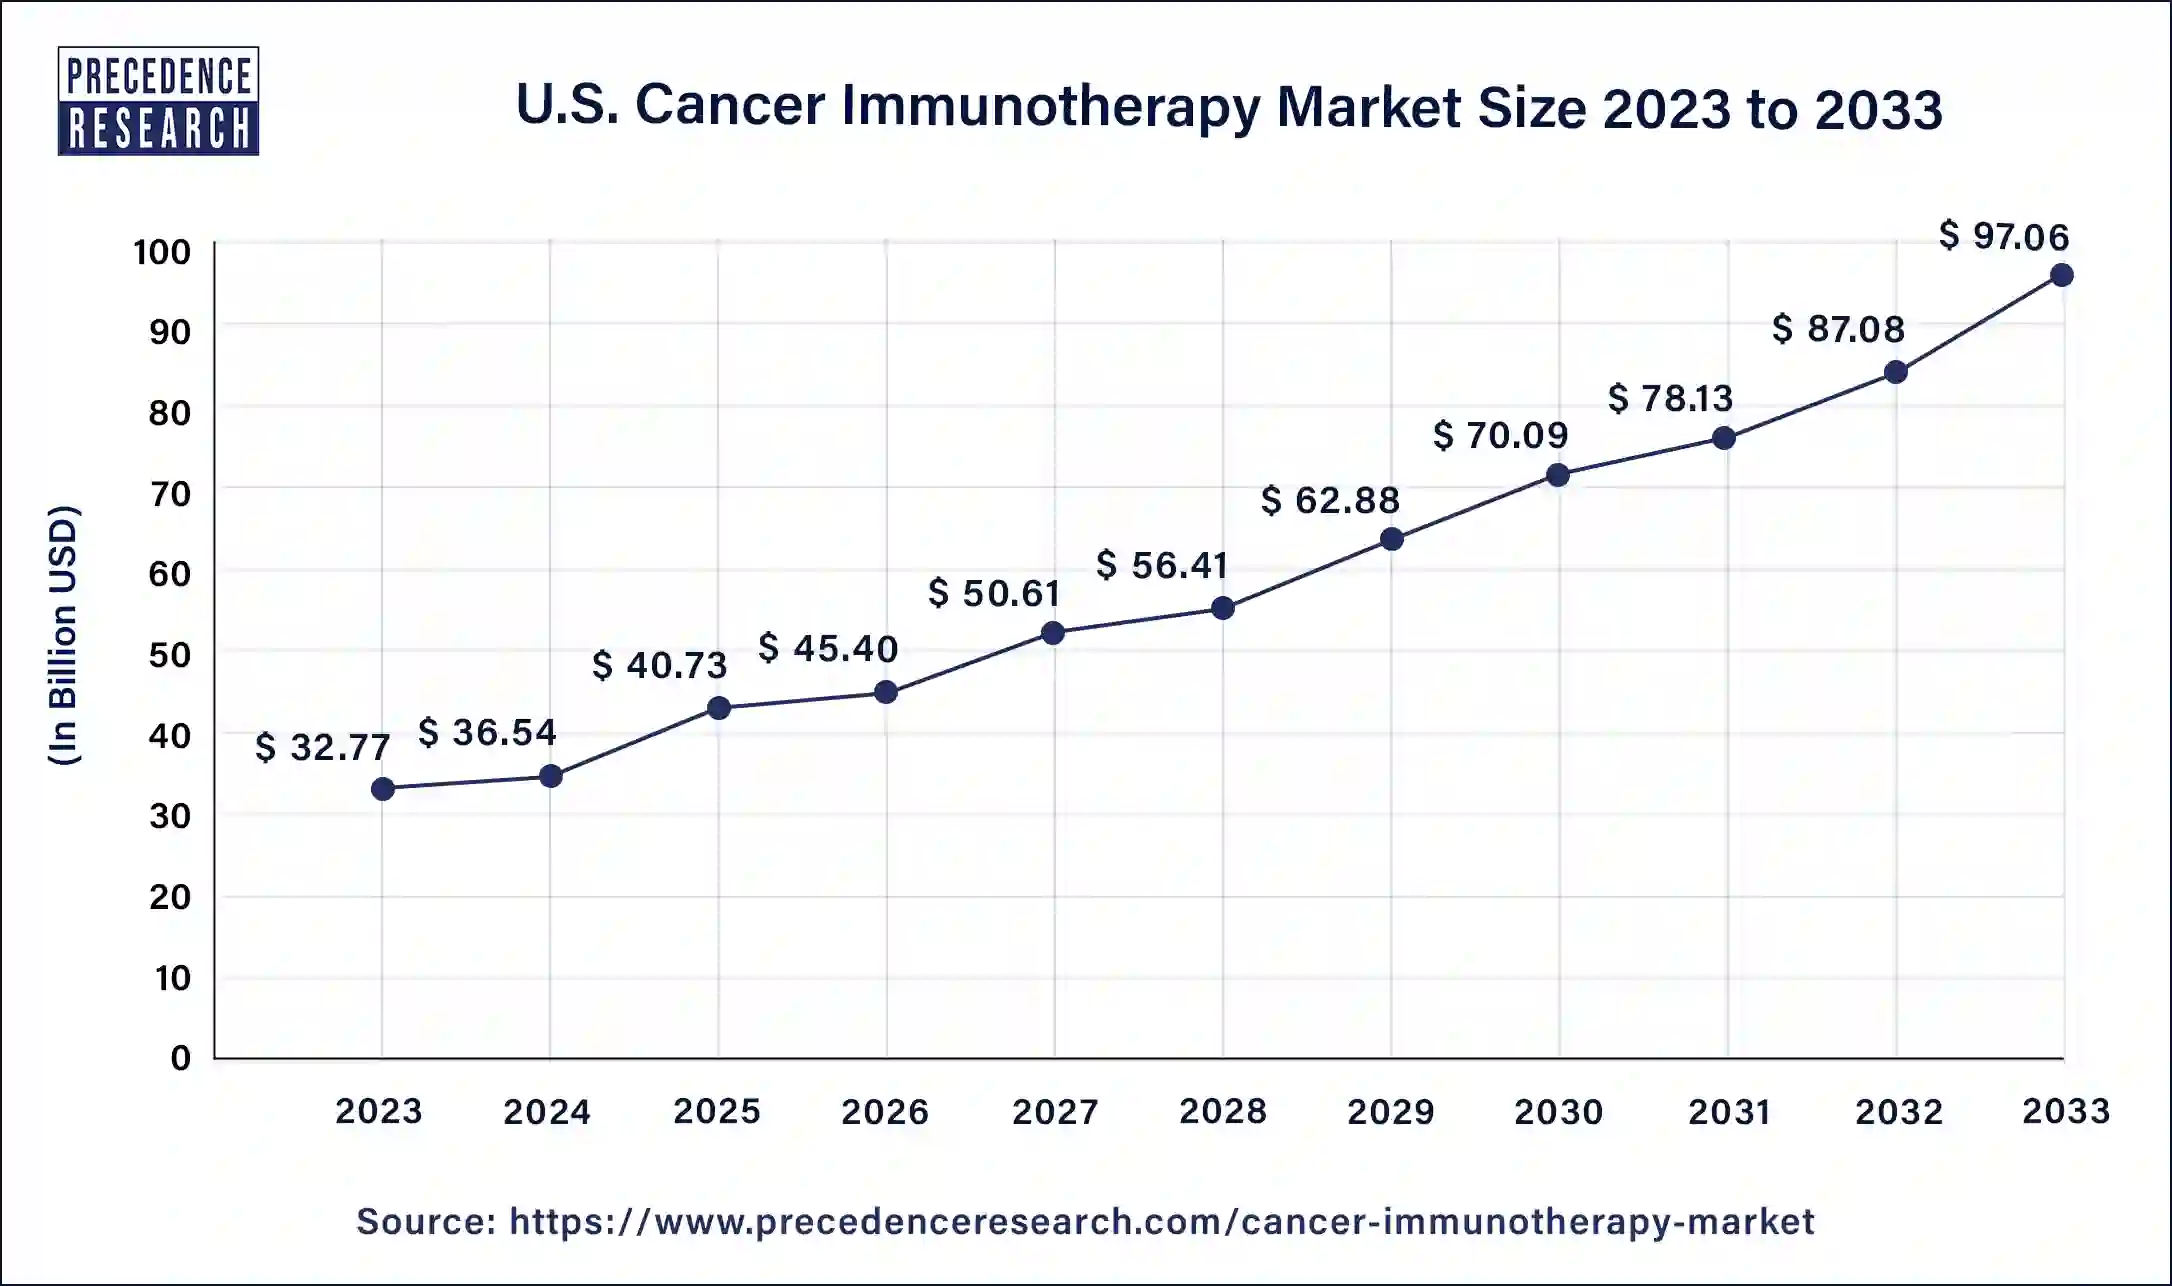 U.S. Cancer Immunotherapy Market Size 2024 to 2033